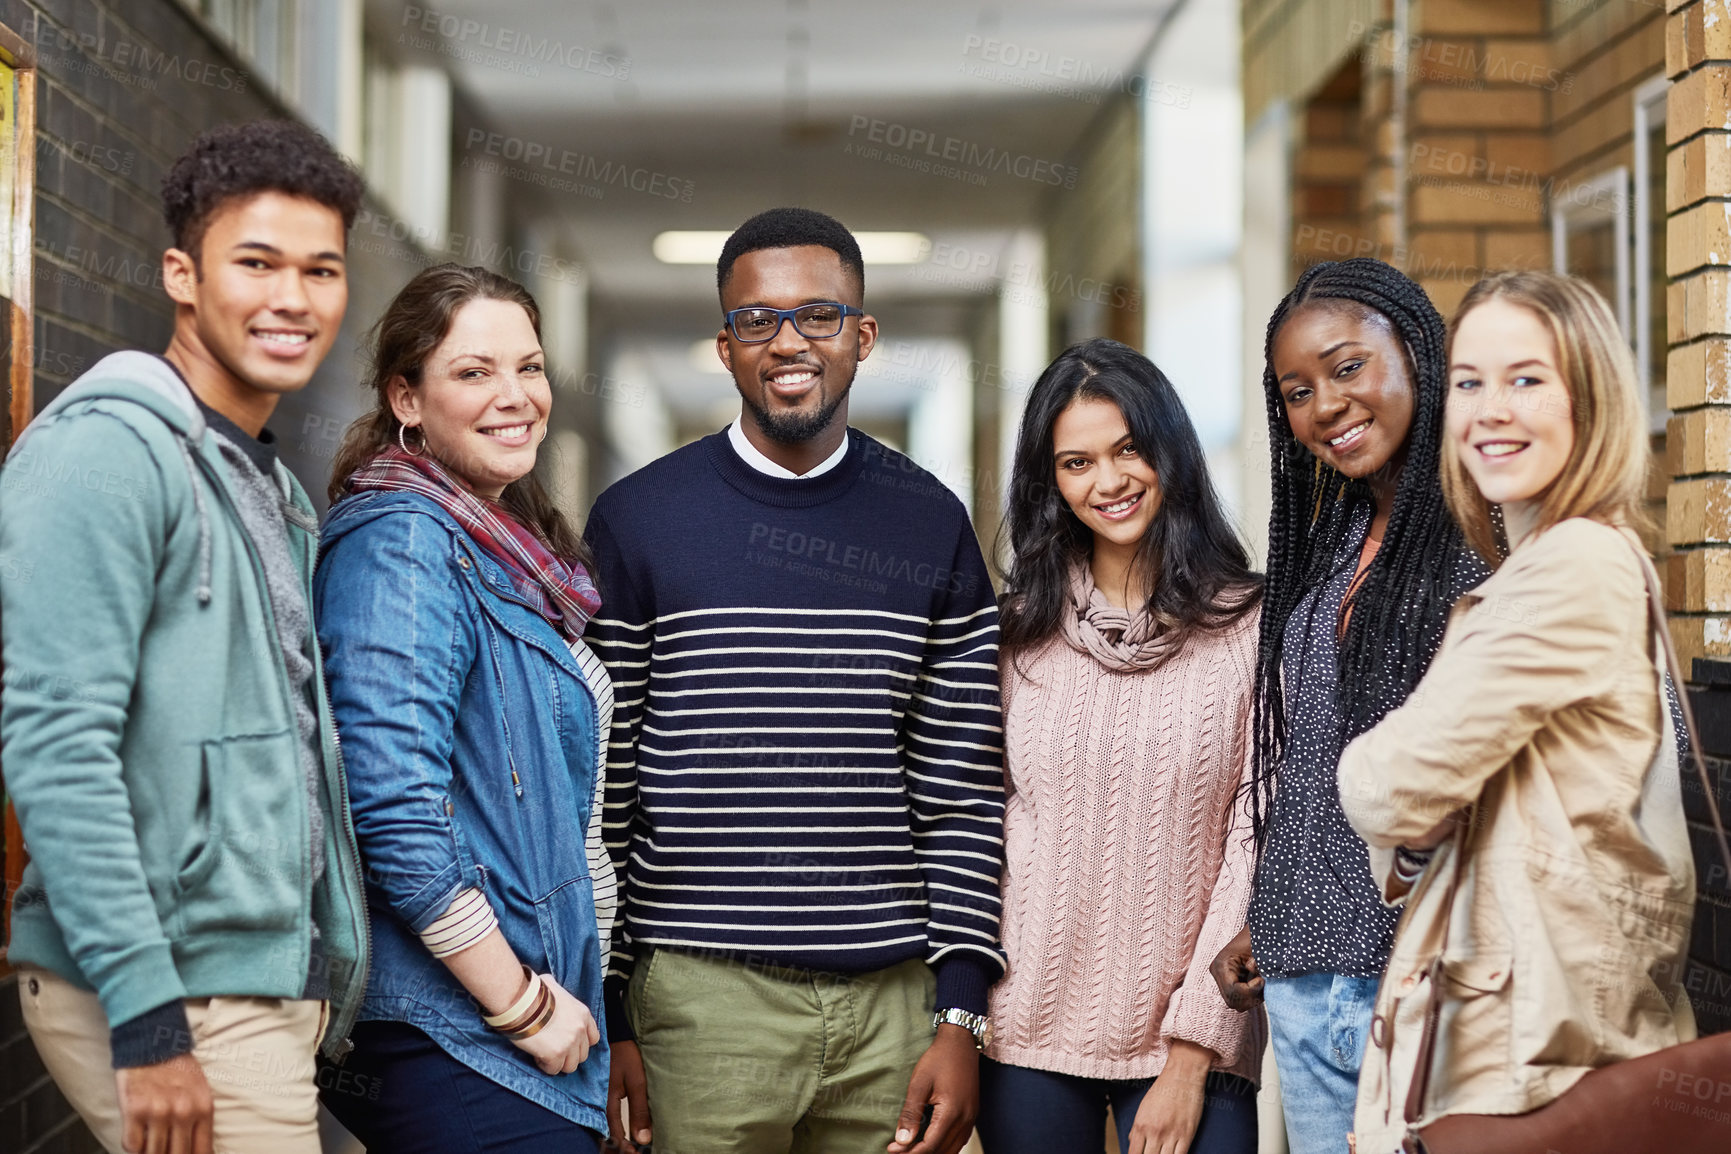 Buy stock photo Portrait of a group of university students standing together in a hallway at campus